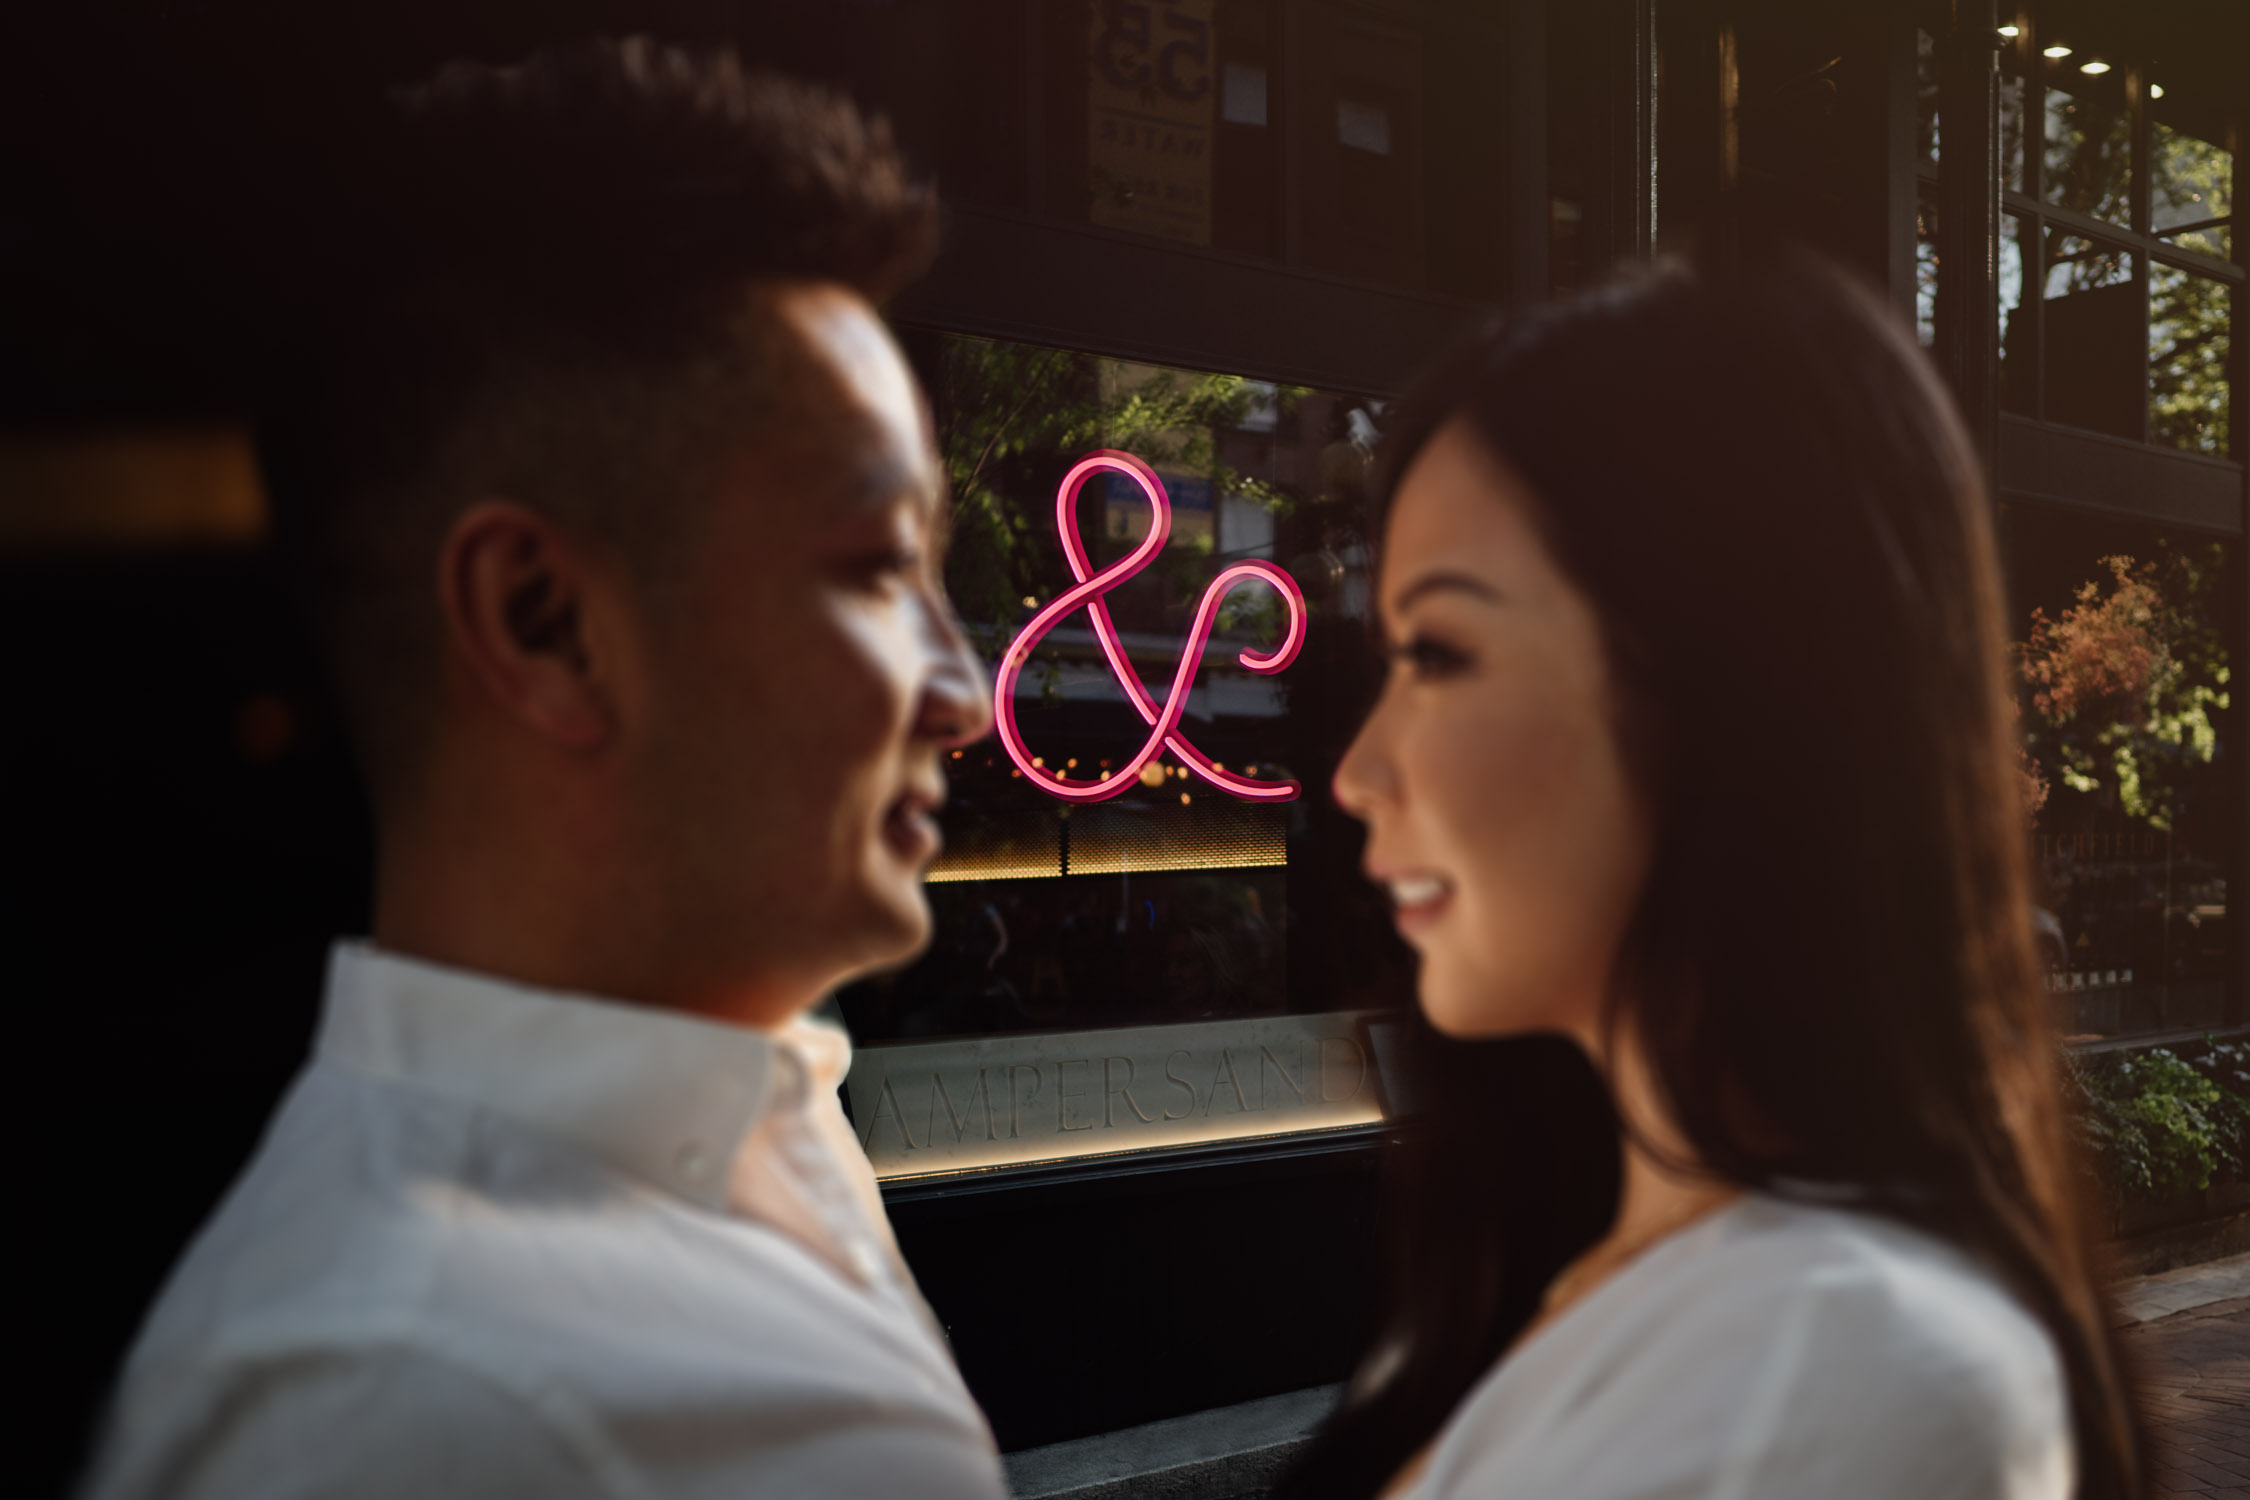 ampersand restaurantgastown engagement photography during golden hour in the summer located in vancouver bc canada